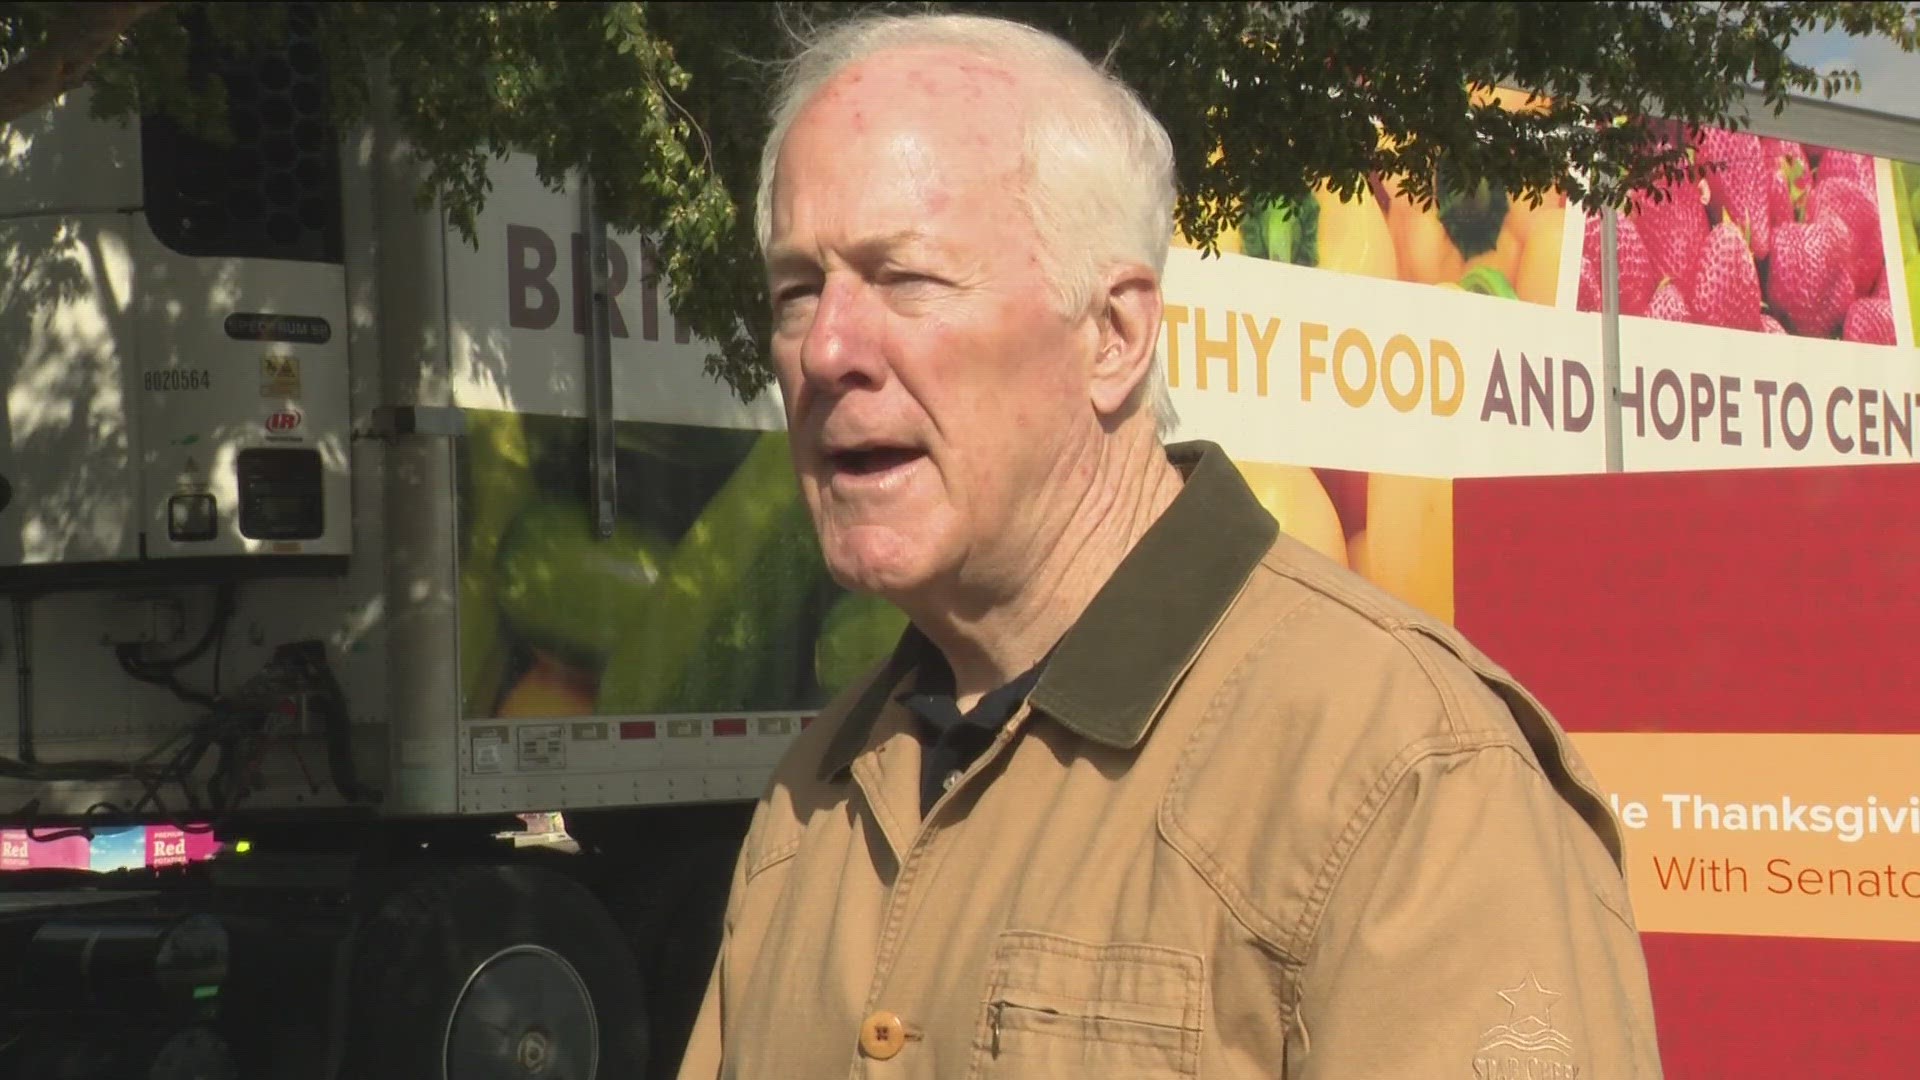 Help for Seniors  Central Texas Food Bank